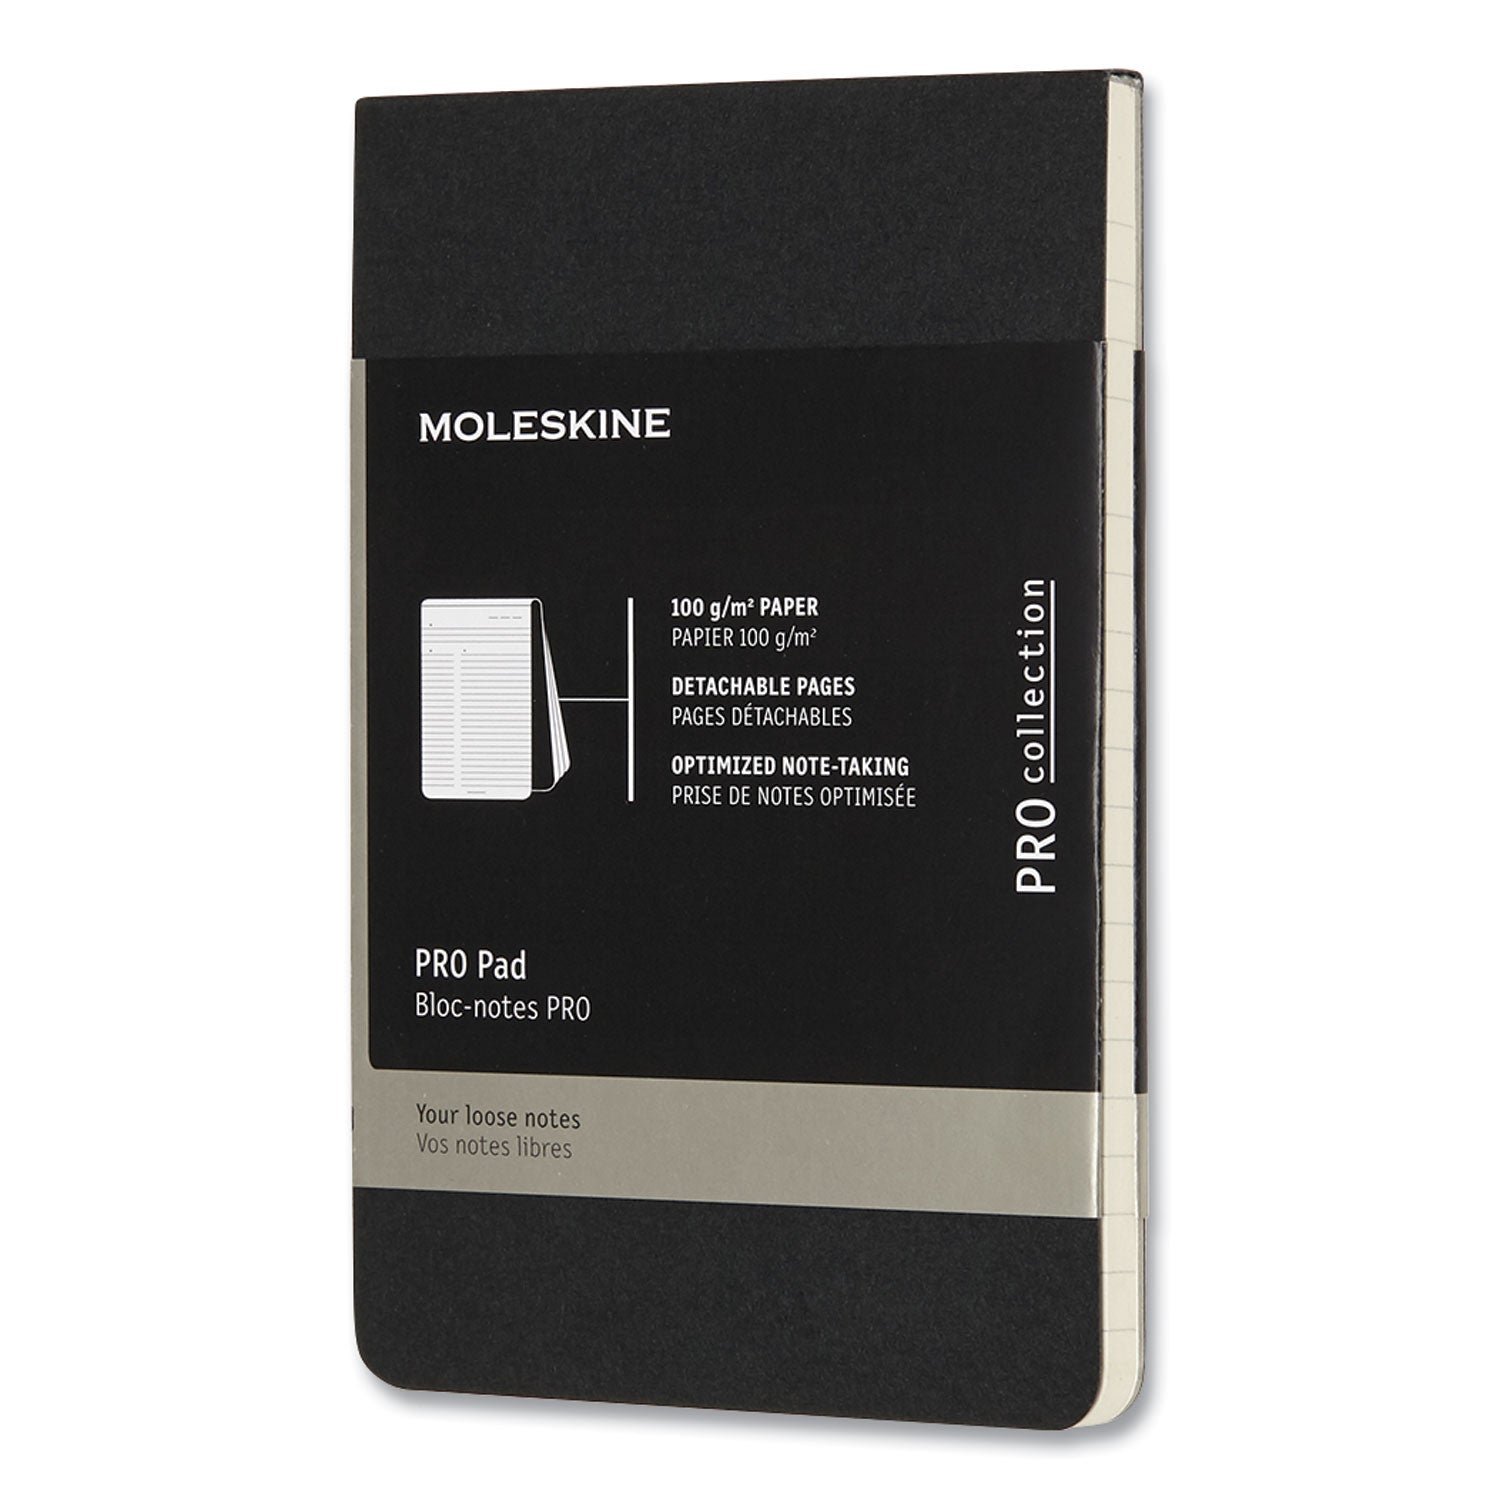 pro-pad-meeting-minutes-notes-format-black-cover-96-ivory-35-x-55-sheets_hbg620909 - 1